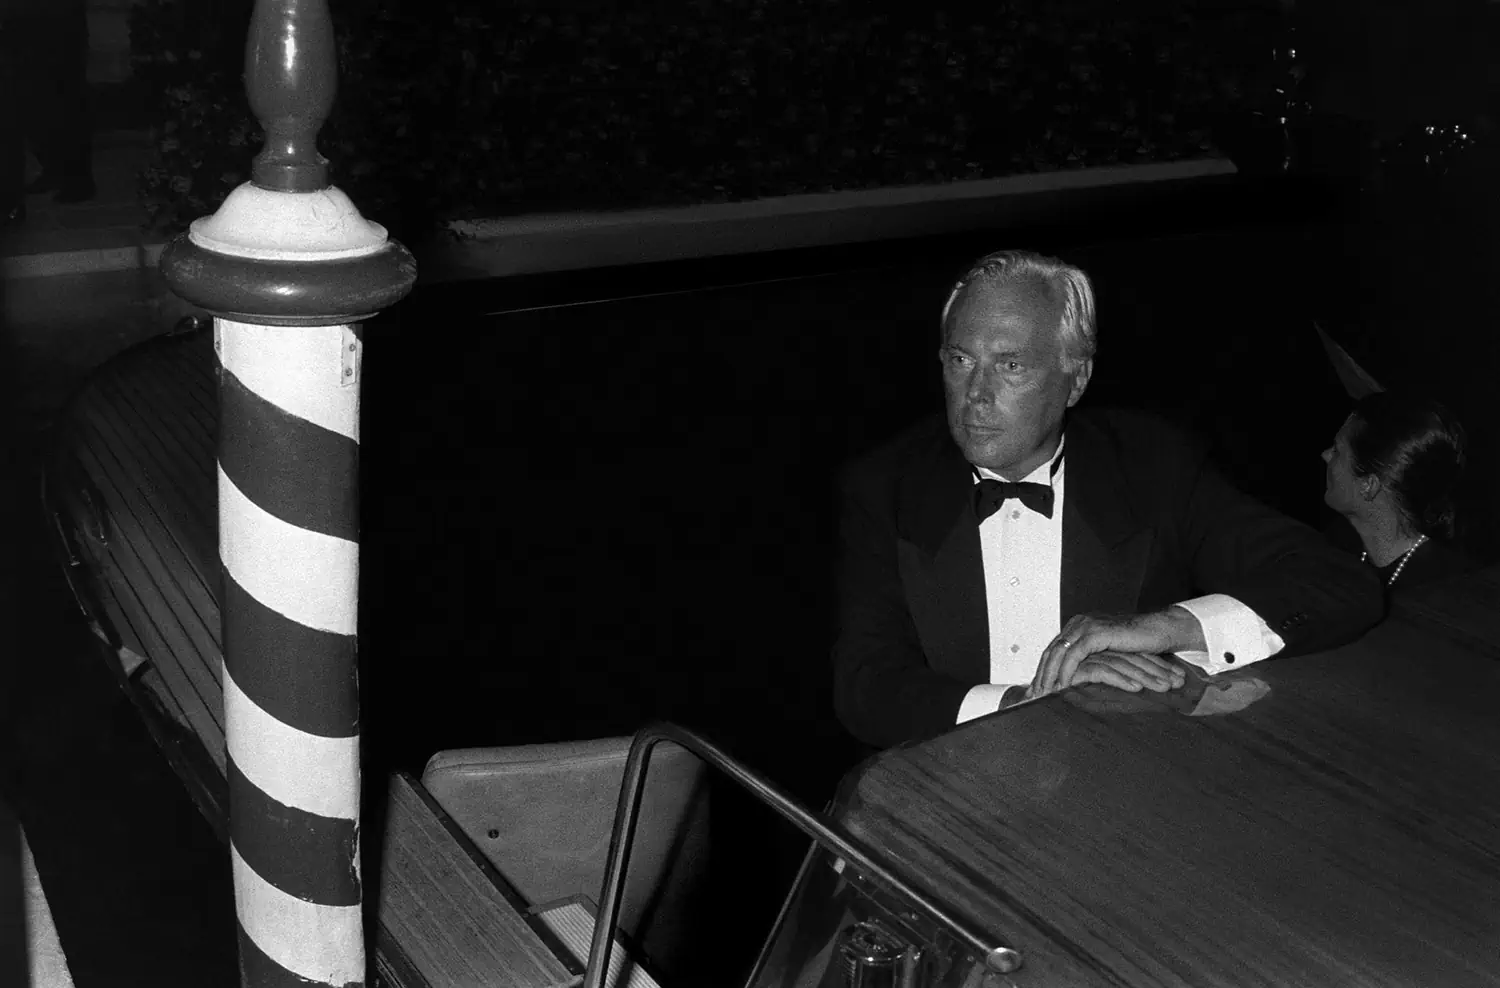 Giorgio Armani set to host ''One Night Only'' event at the Venice Film Festival